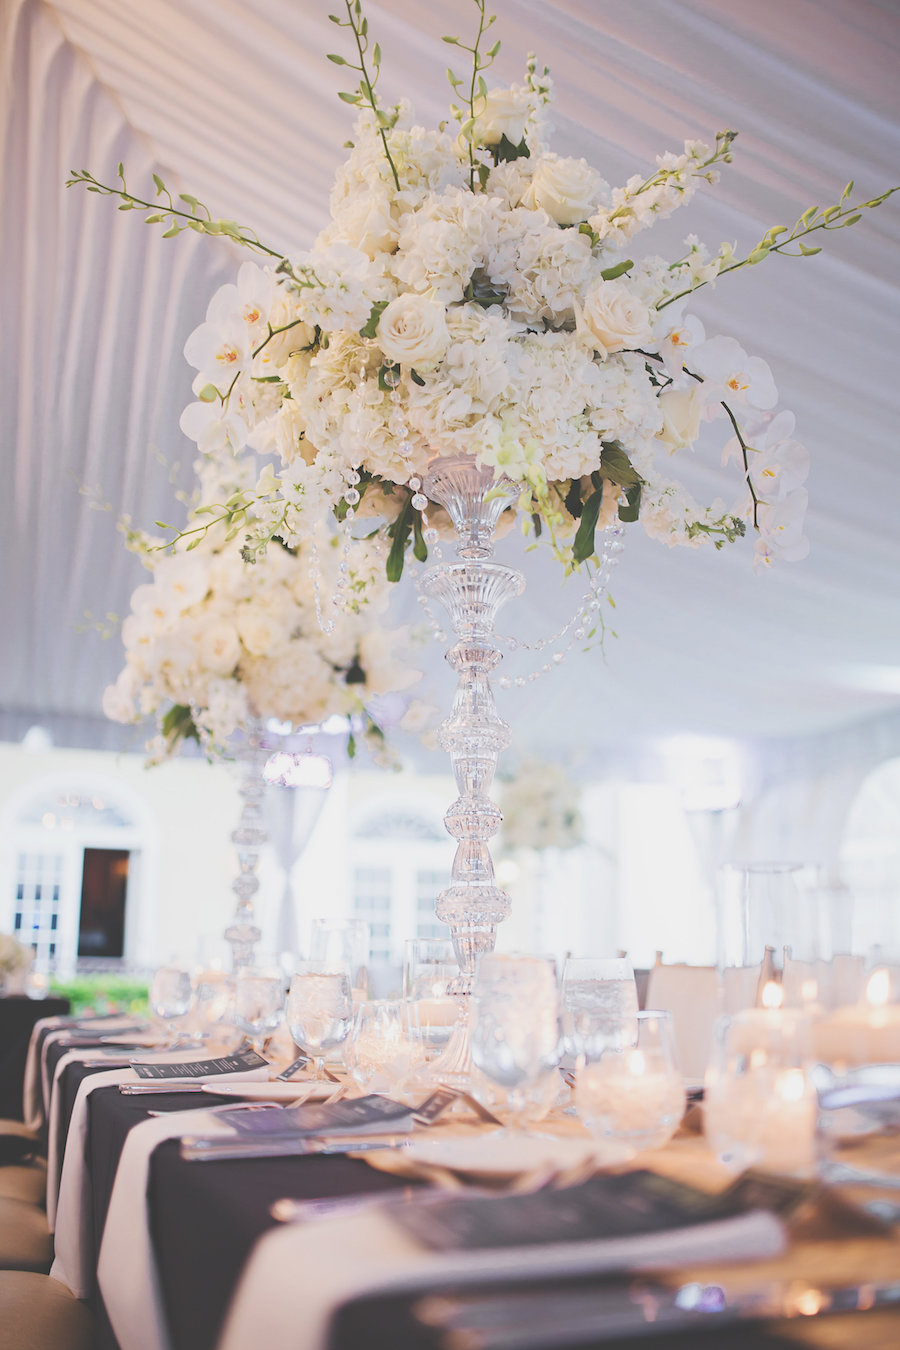 Tall Crystal and Floral Wedding Centerpiece with White Orchids and Roses in Sarasota Outdoor Reception Tent | Sarasota Wedding Planner NK Productions